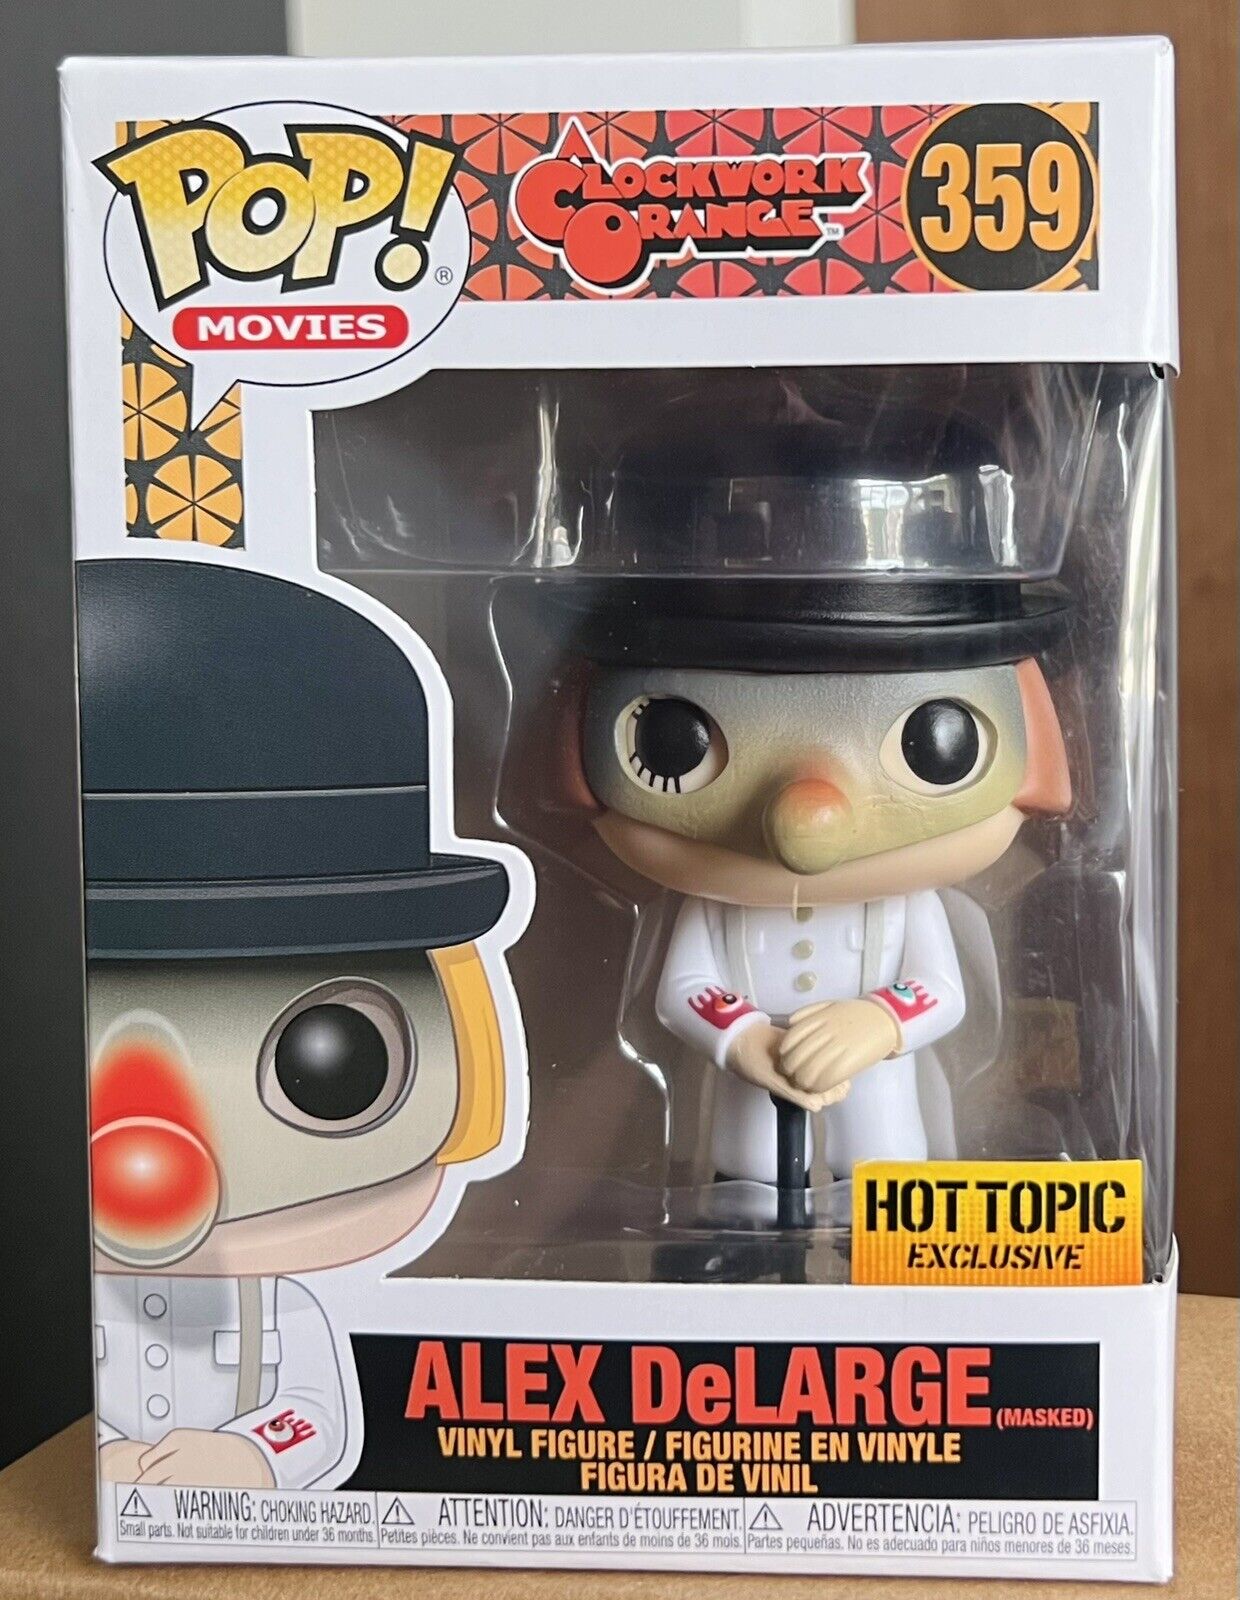 VAULTED Funko Pop: (Masked) ALEX DeLARGE #359 Hot Topic Exclusive